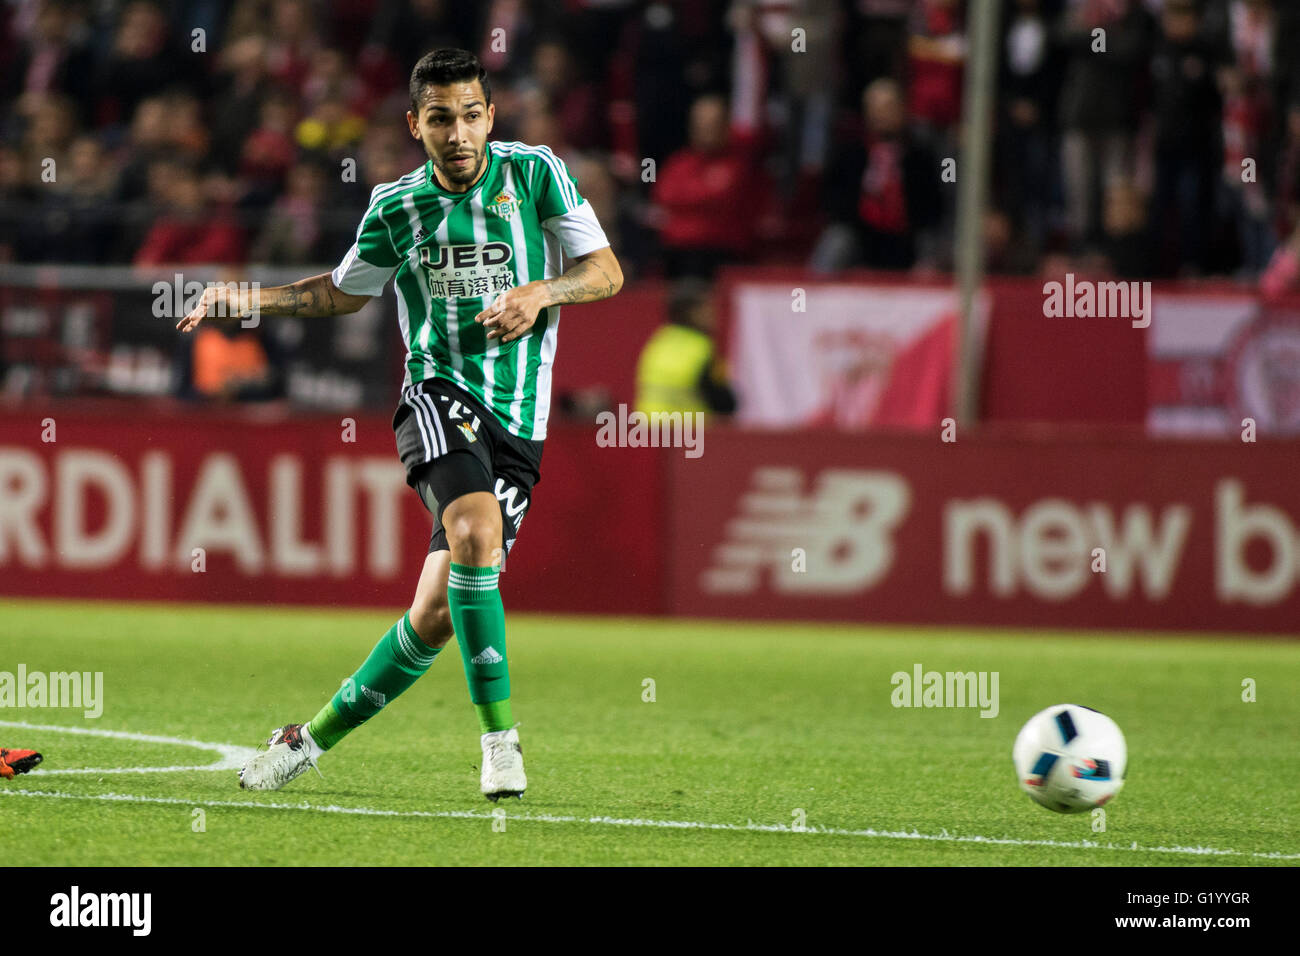 Petros Matheus dos Santos Araujo in action during the match of King's Cup  between Sevilla FC